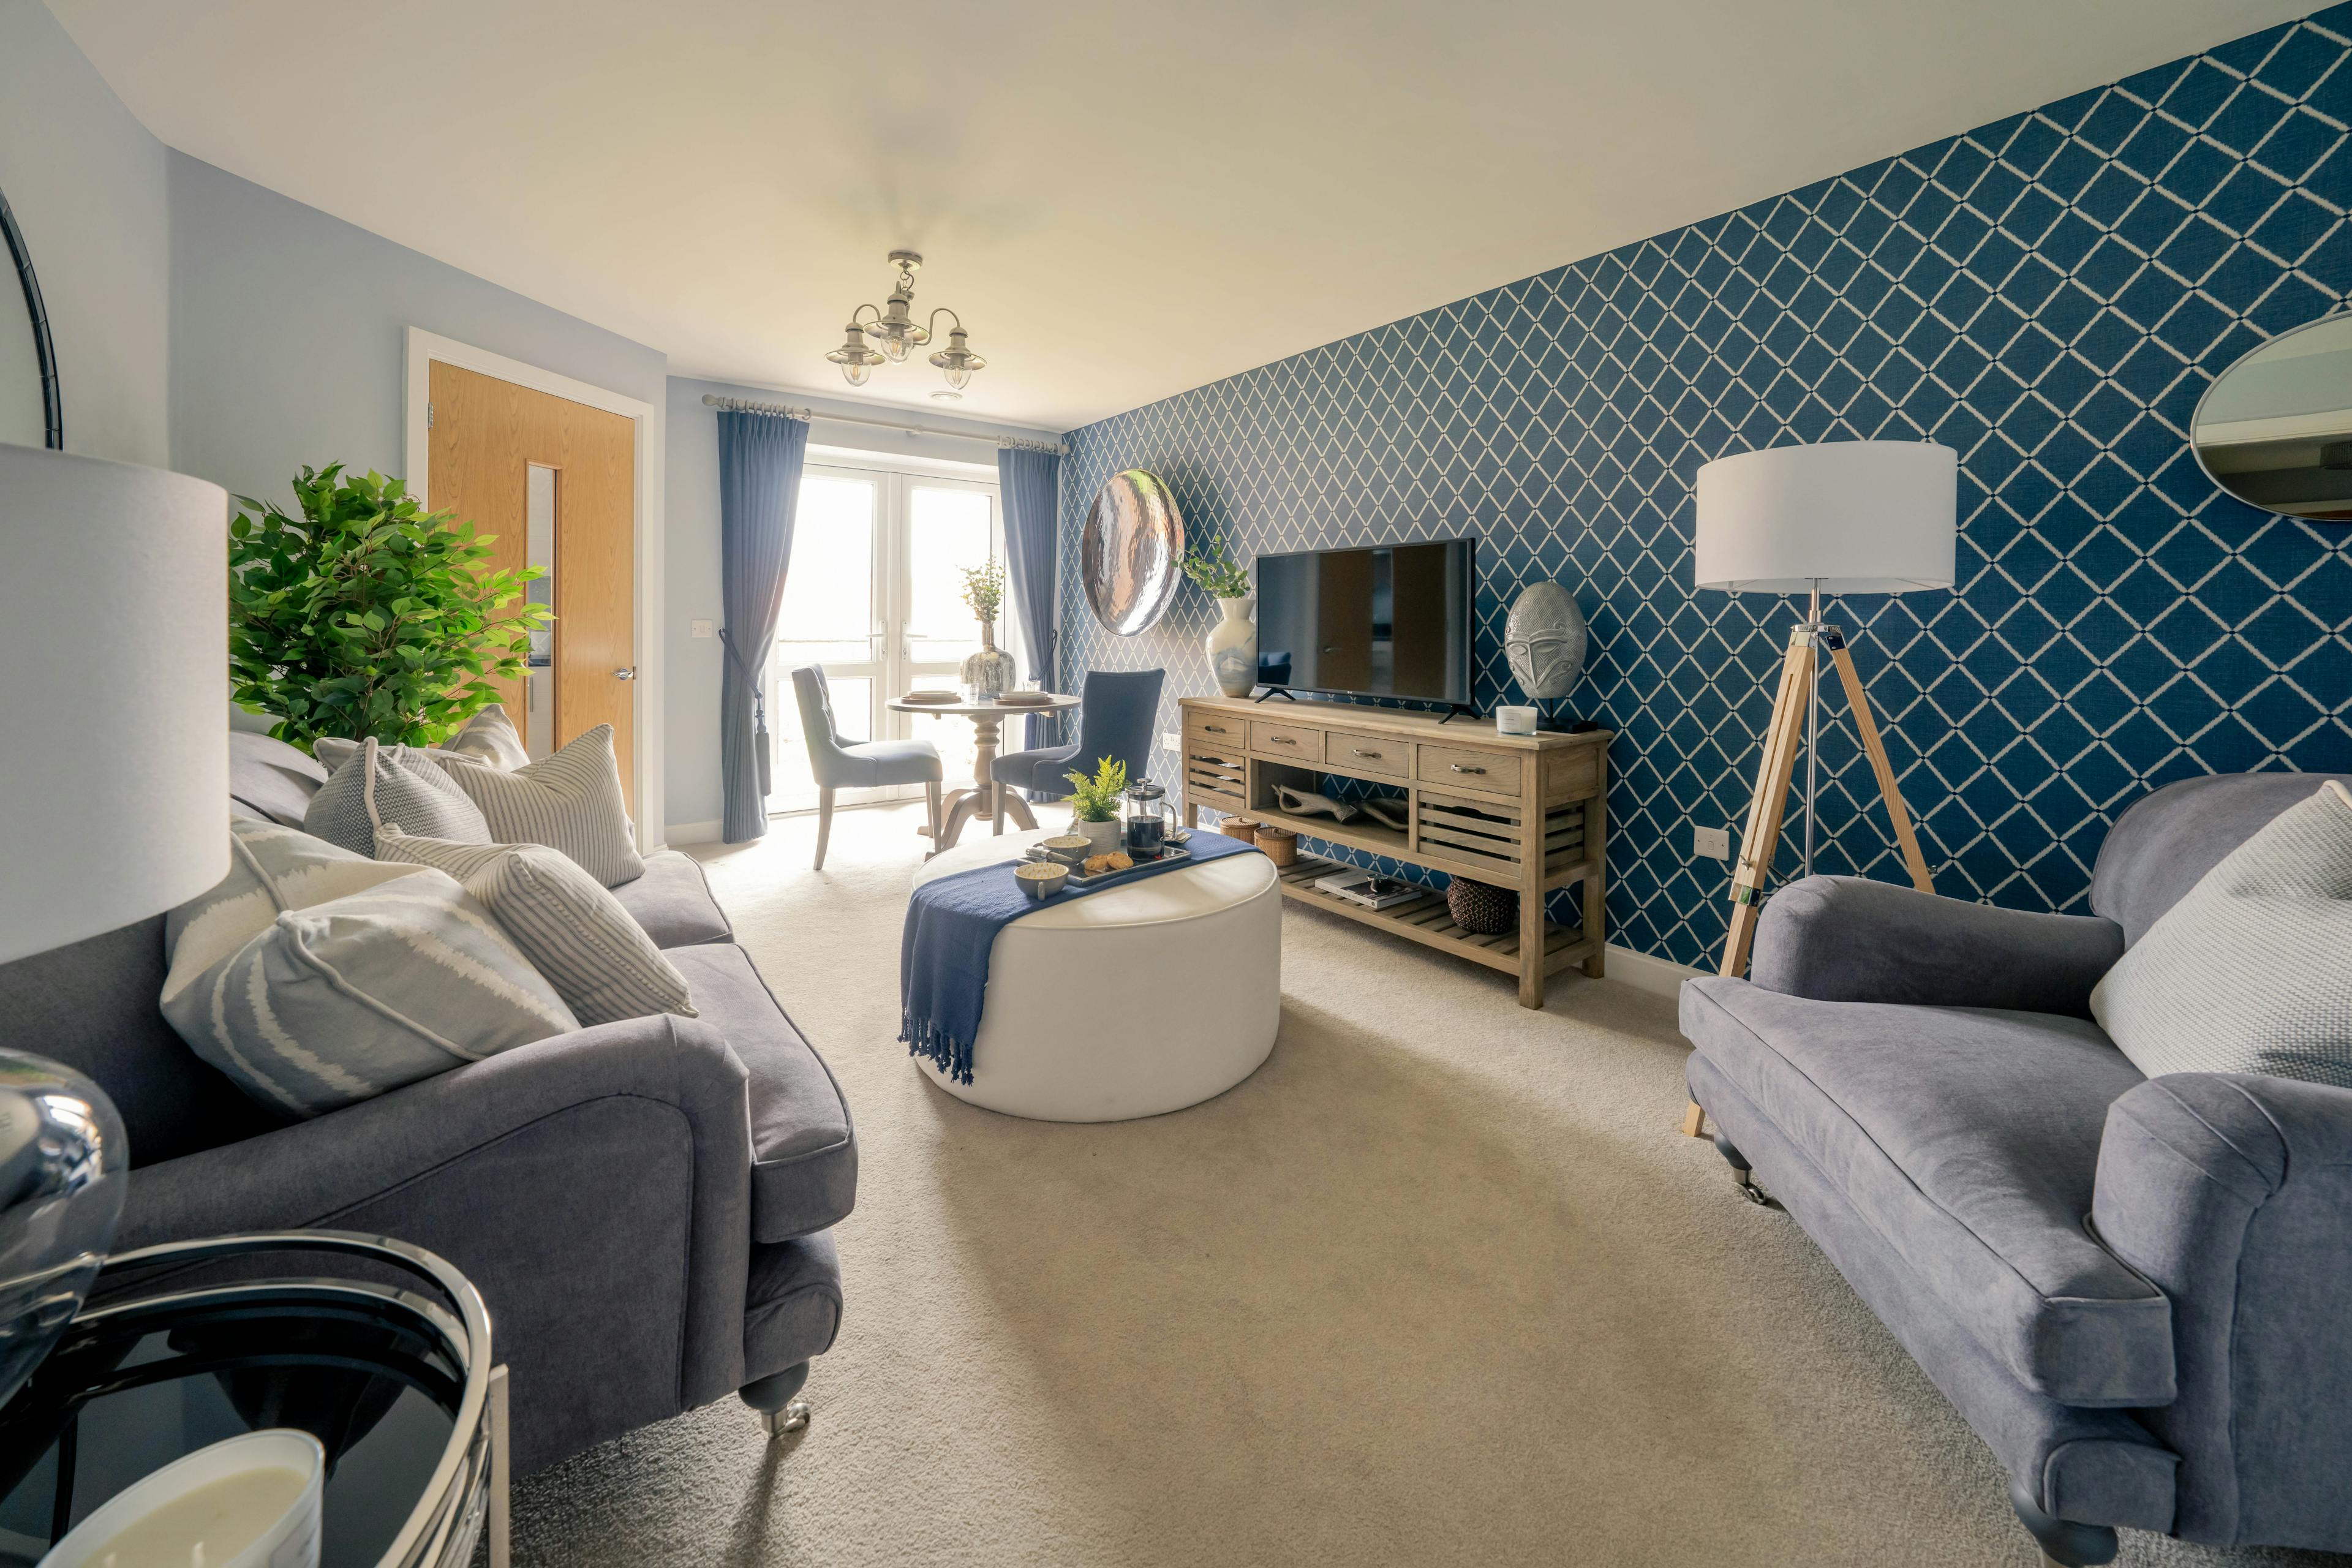 Living Room at Somers Brook Court Retirement Development in Newport, Isle of Wight